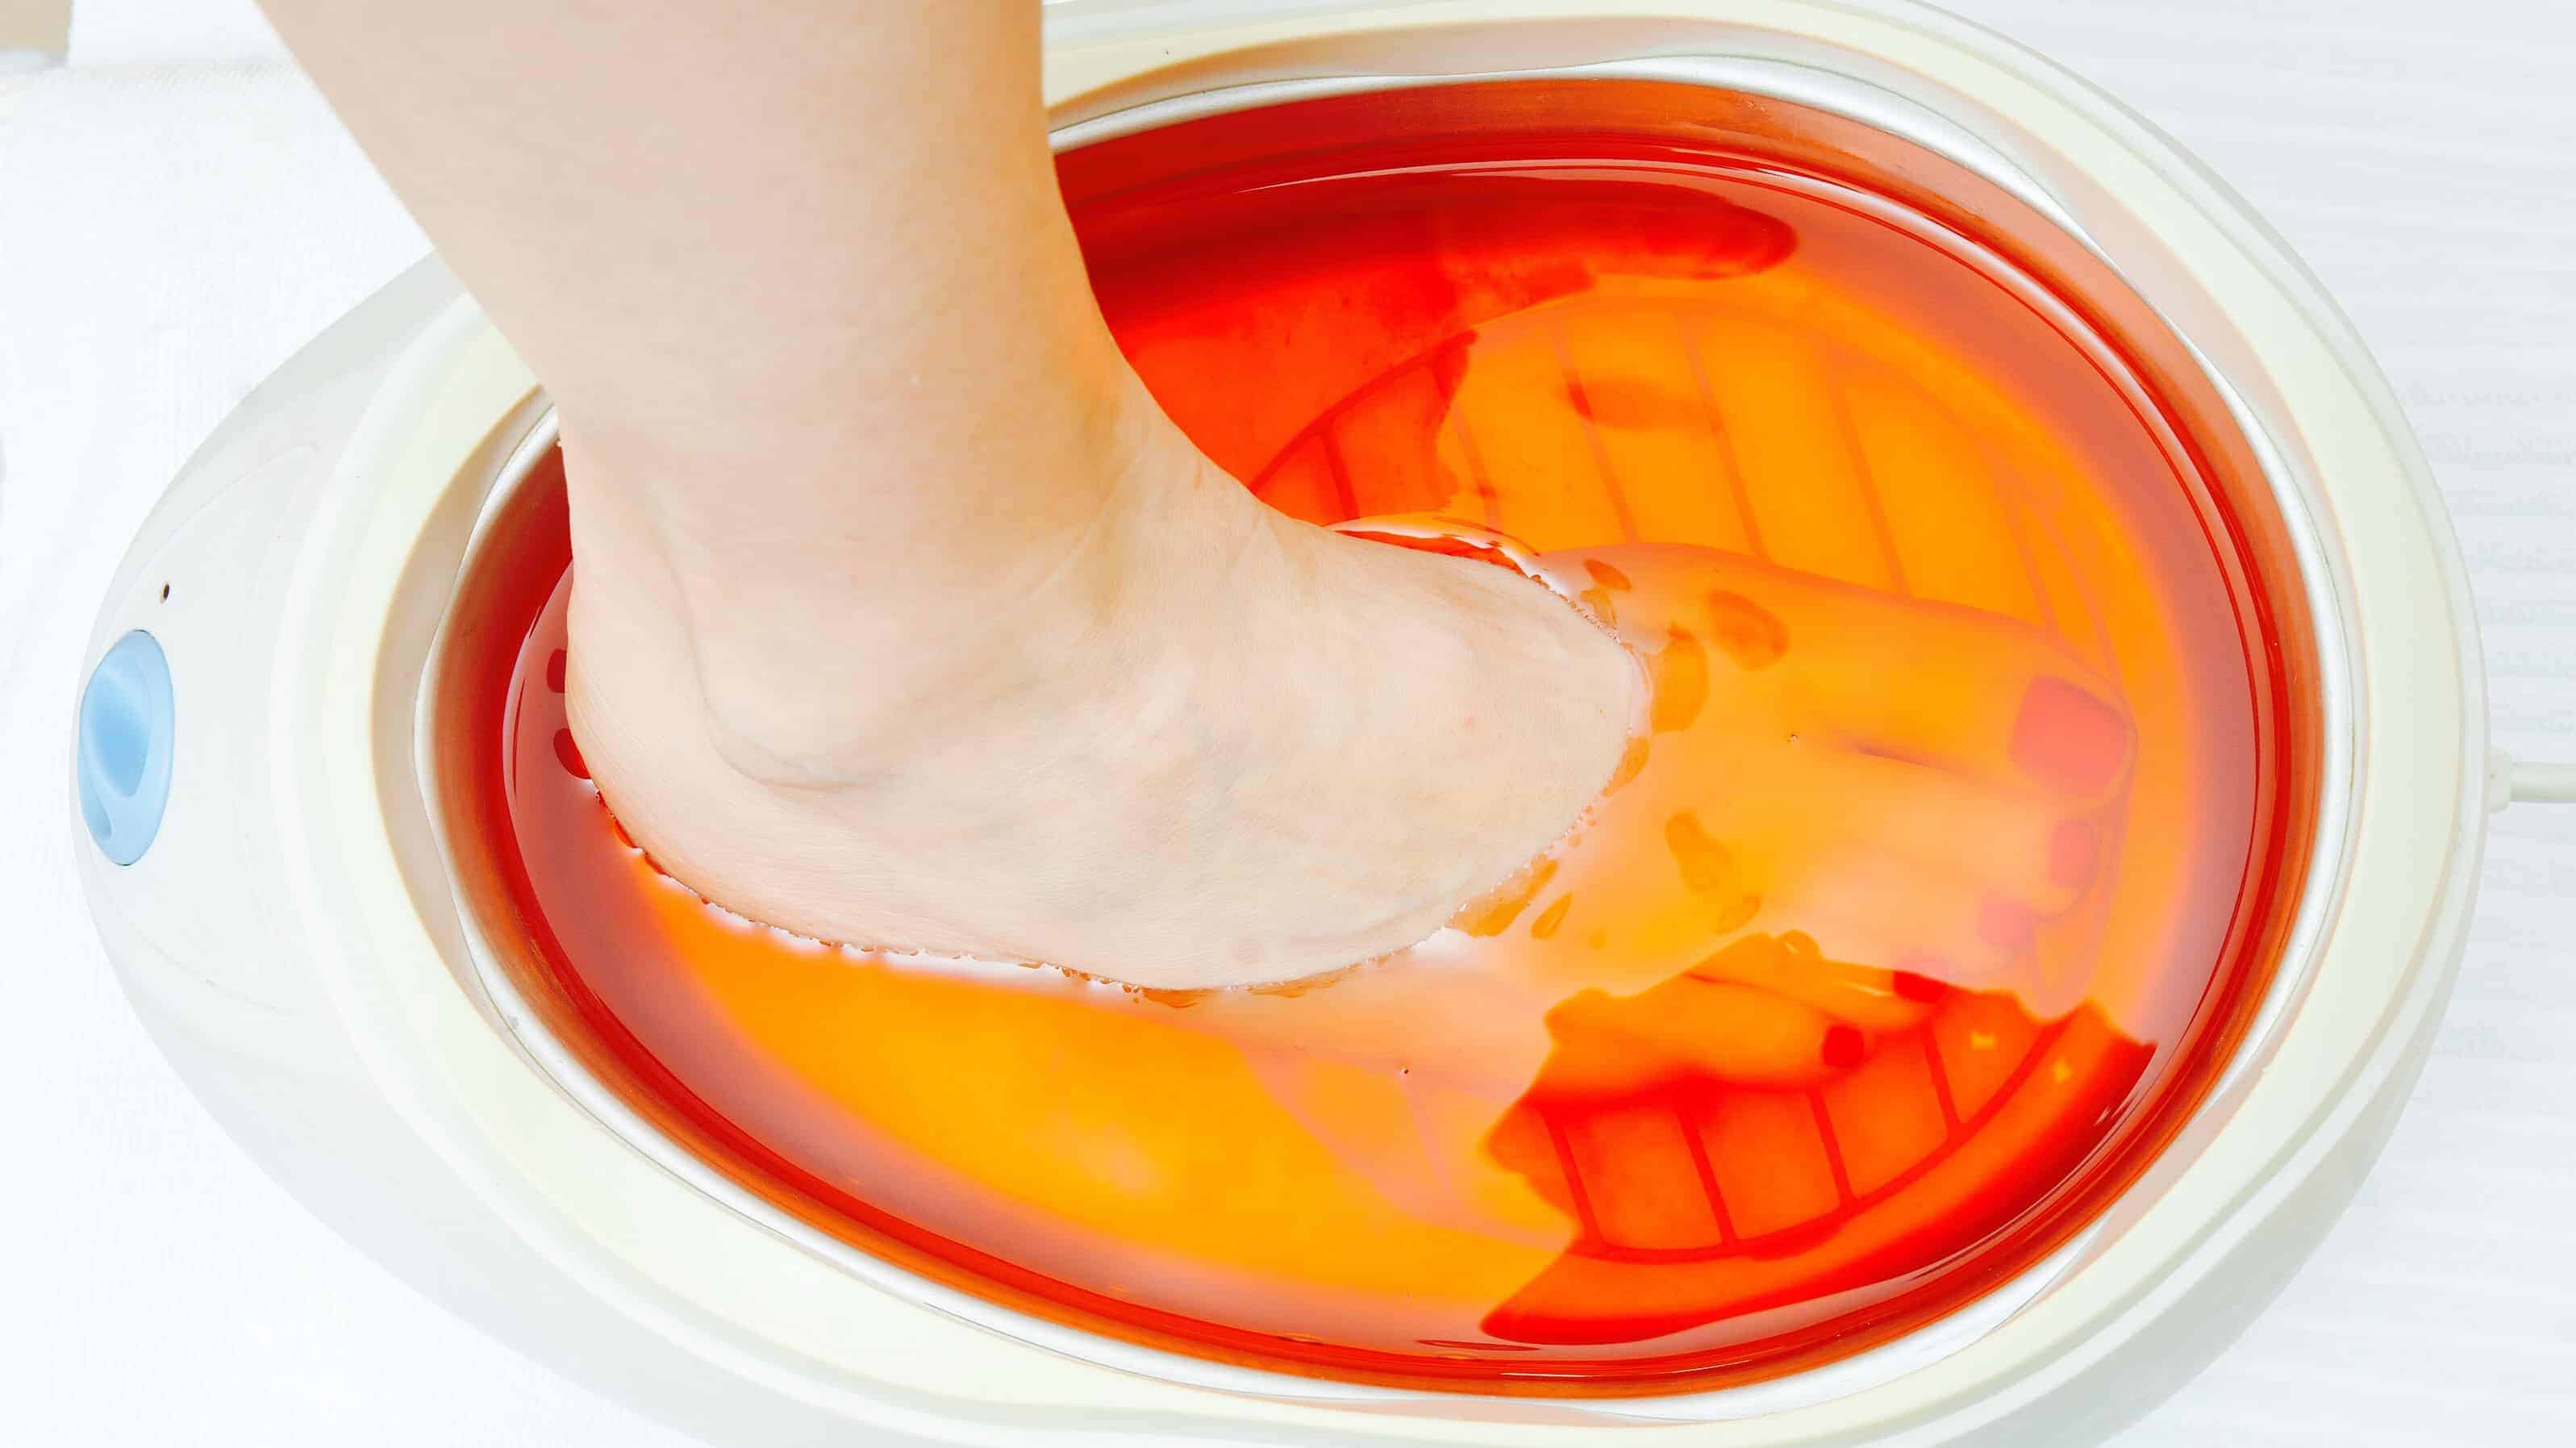 How To Make an Apple Cider Vinegar Detox Foot Soak To Flush Toxins and Heal Your Body